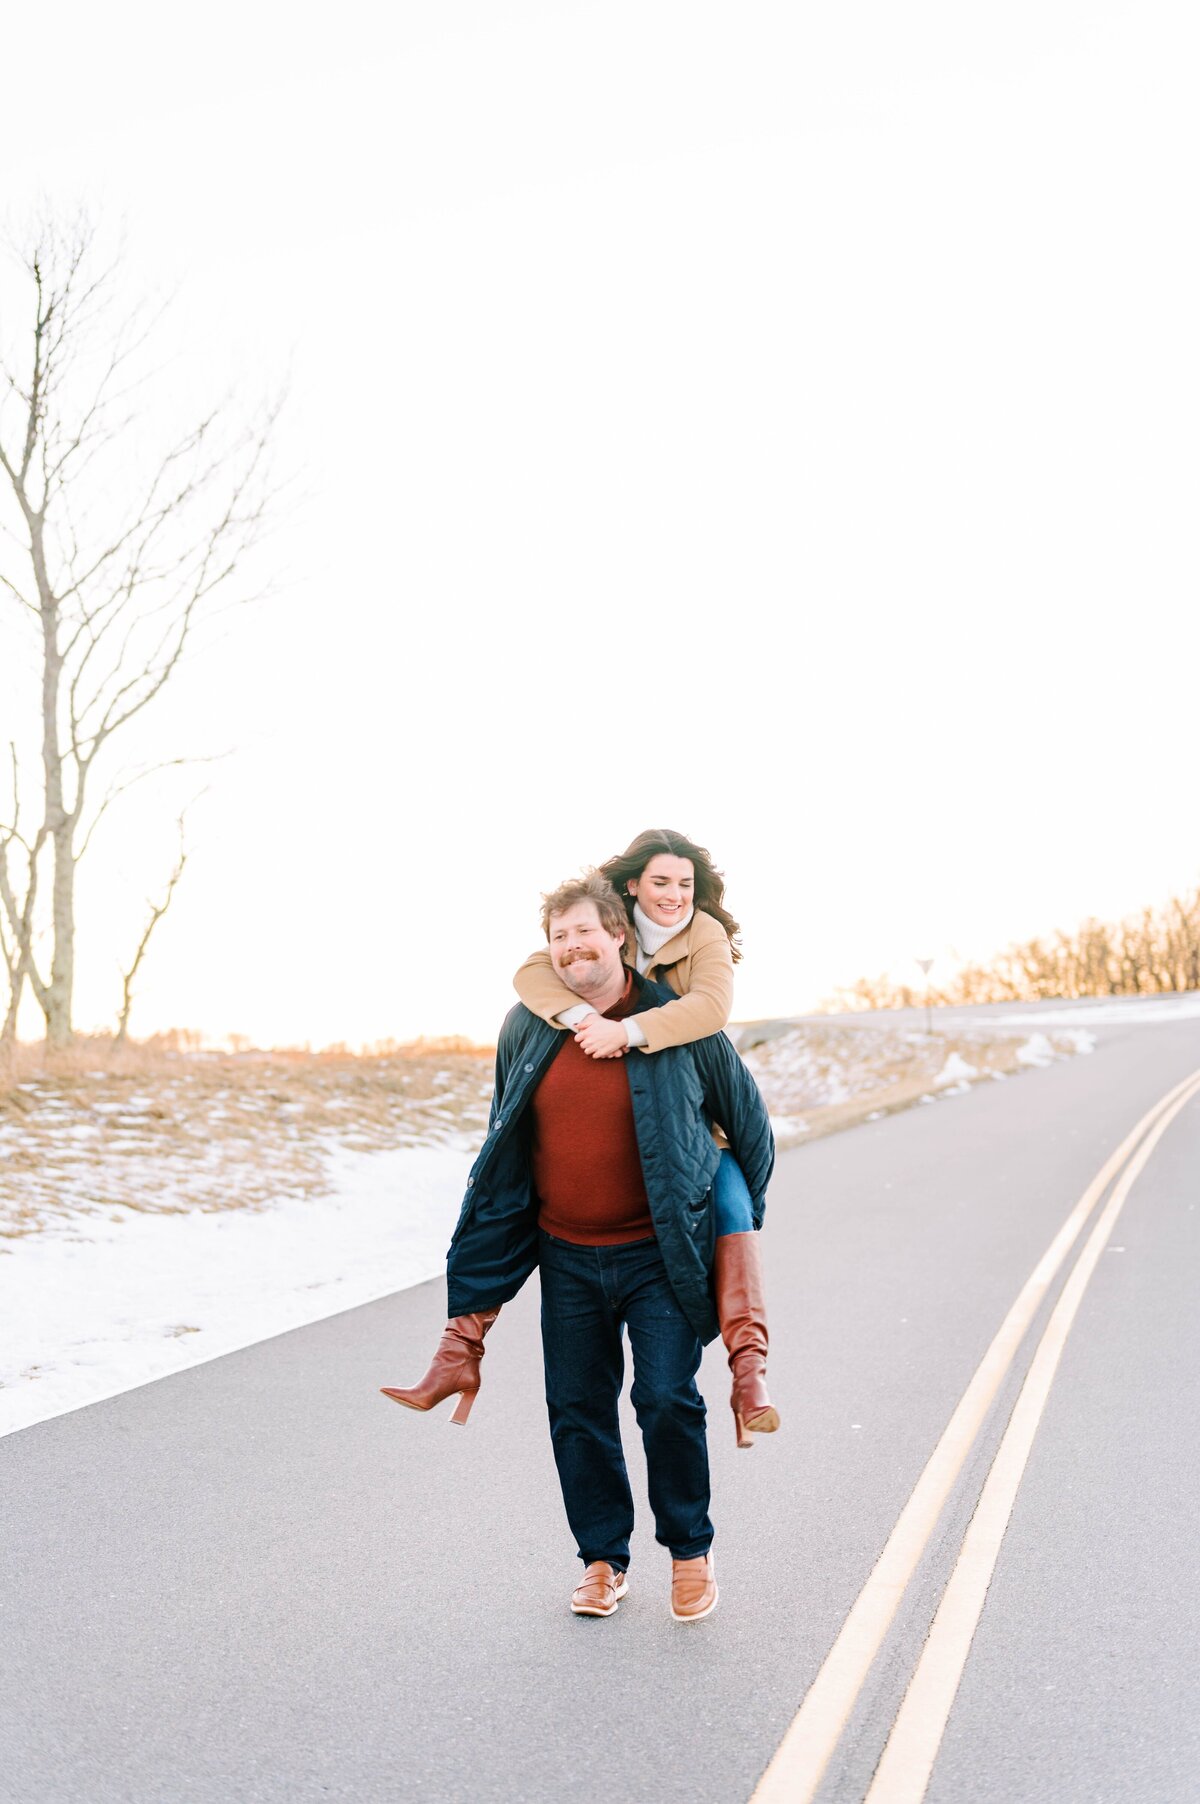 Jamie & Will Blowing Rock NC Winter Engagement Session_0785